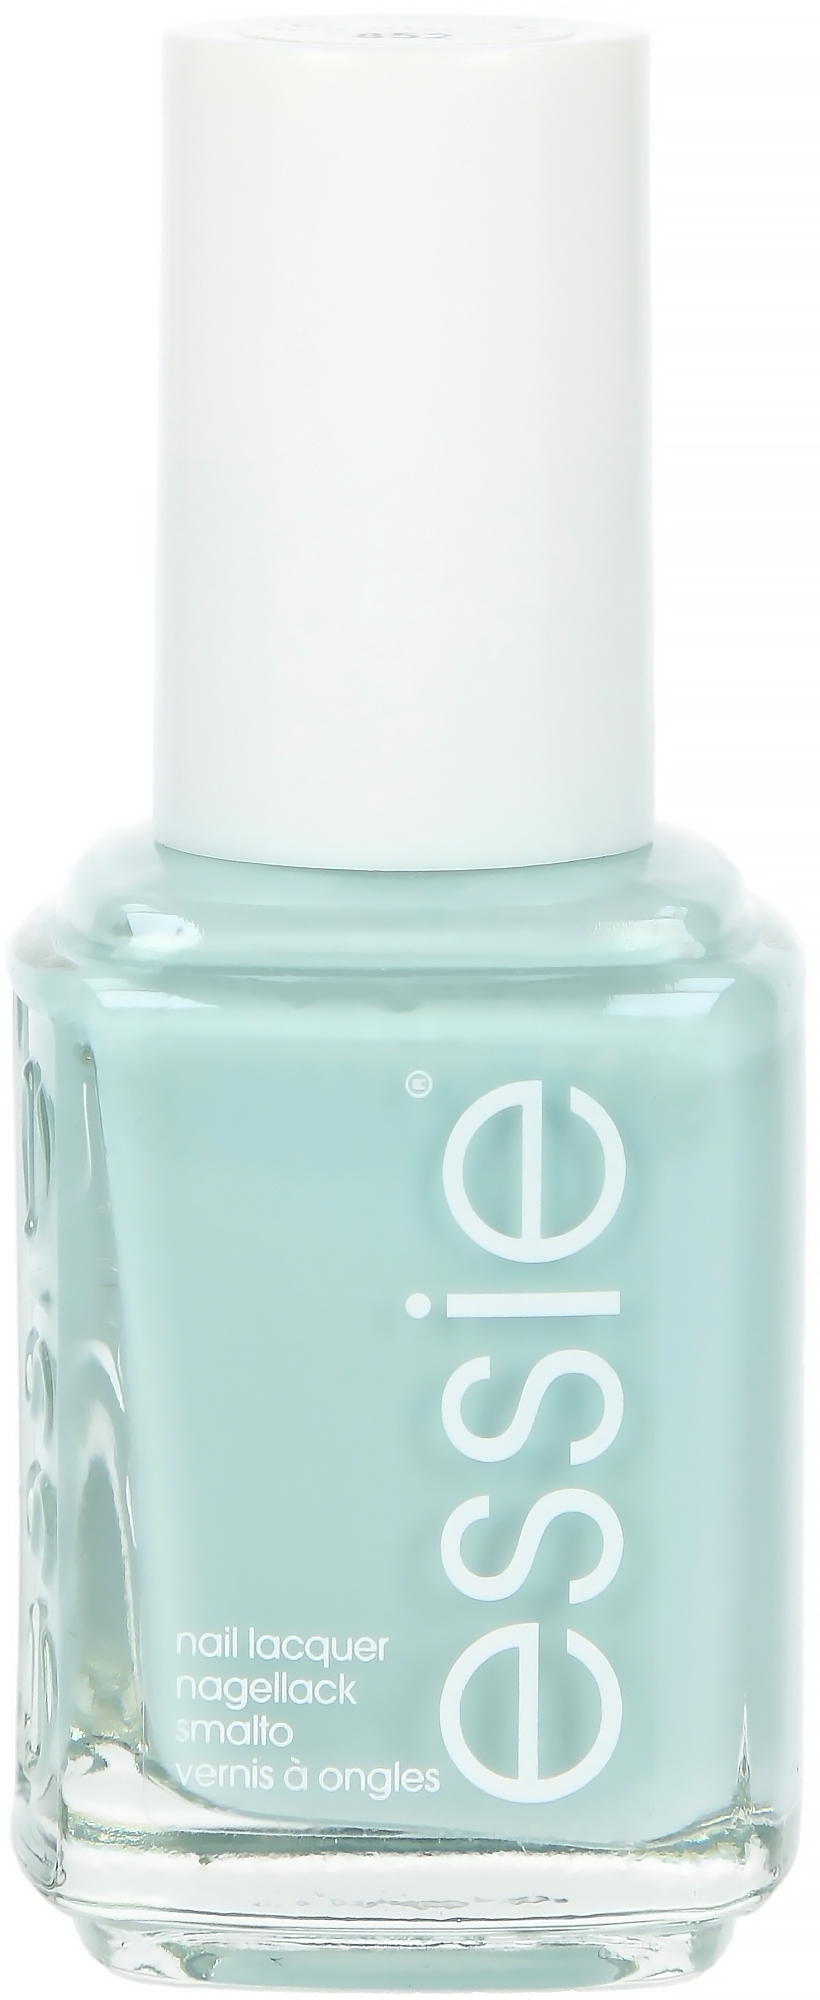 Nail Lacquer Collection 852 Essie Midsummer Blooming Friendships